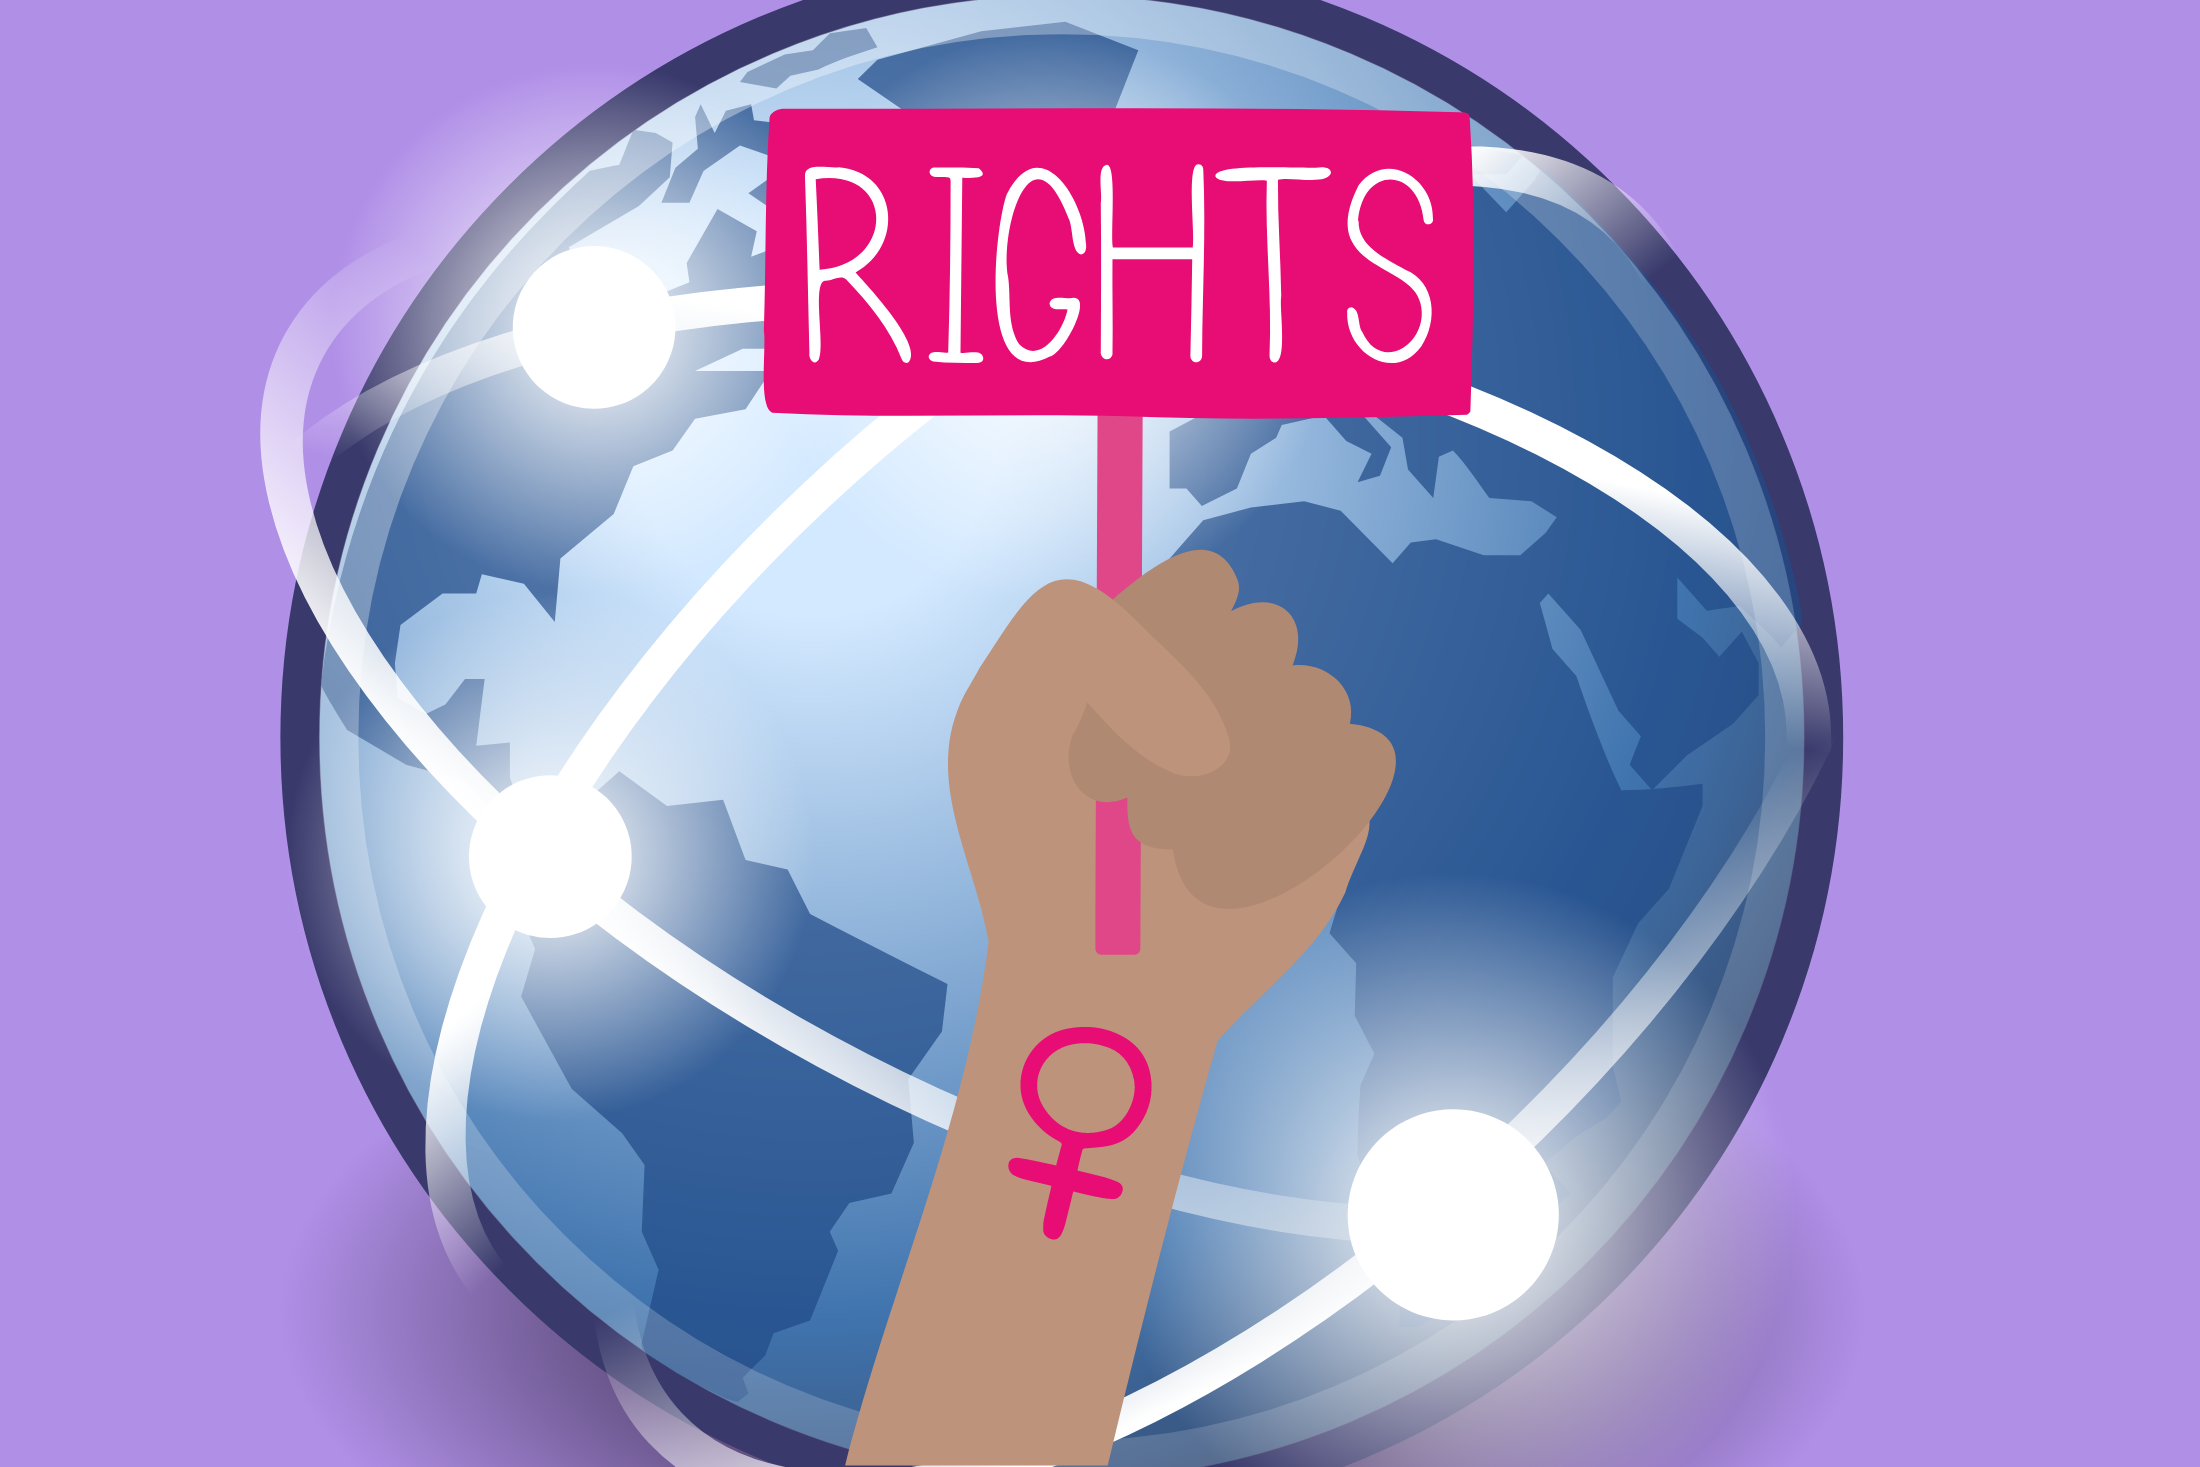 Graphic of globe with beams of light encircling it. In front a brown hand with a pink women's symbol holds a sign that says "rights"